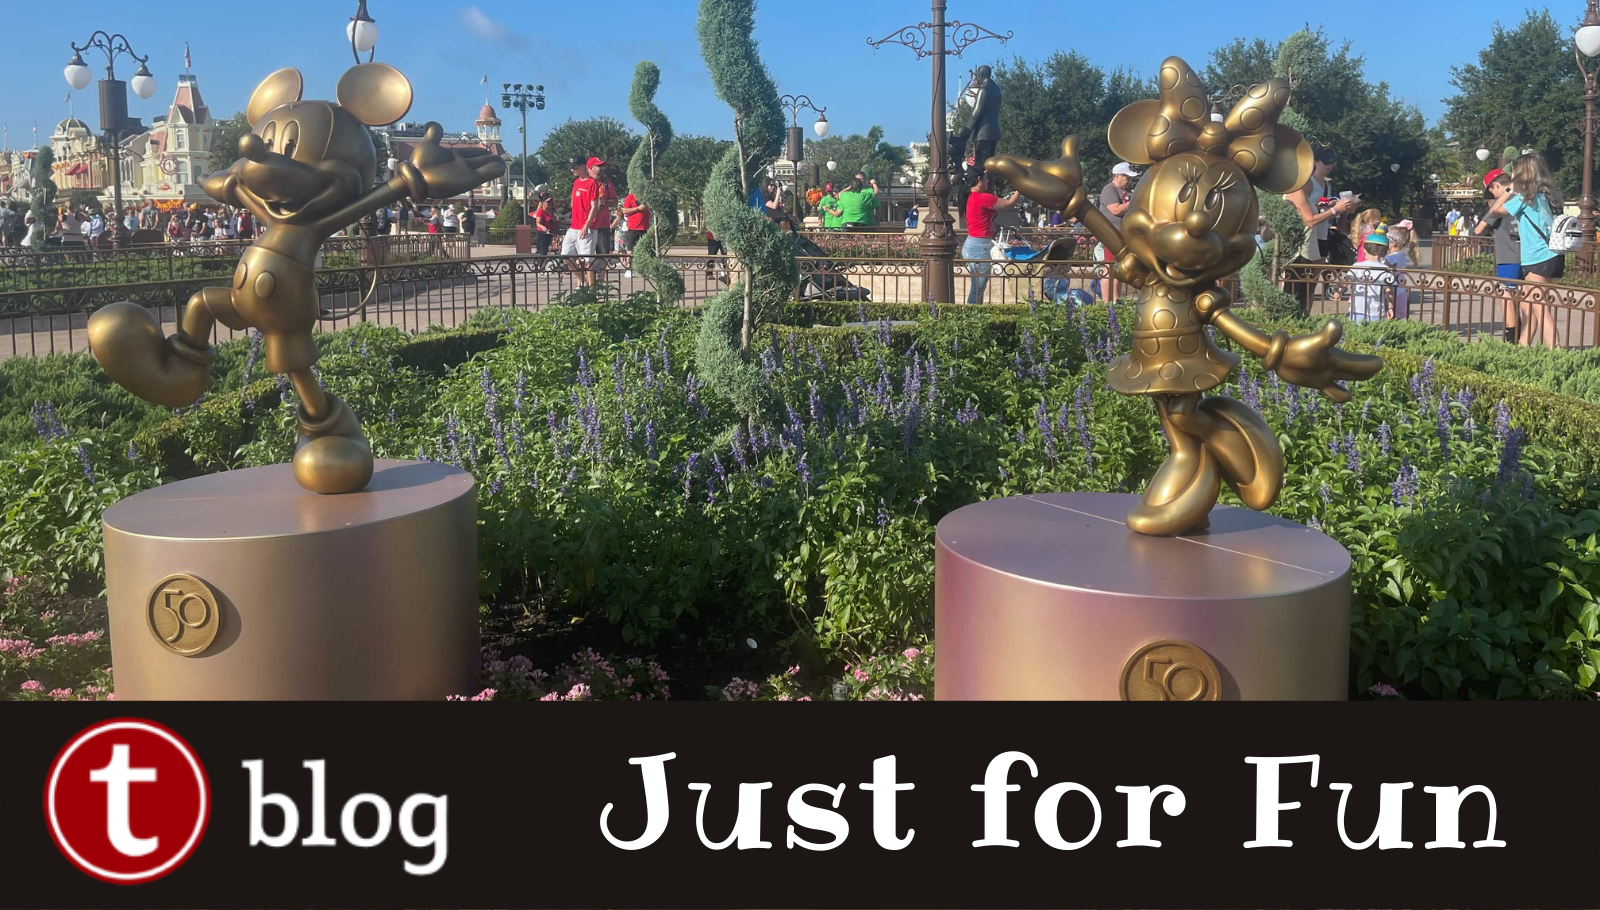 11 Curious Facts to Celebrate 60 Years of Disneyland's Alice in